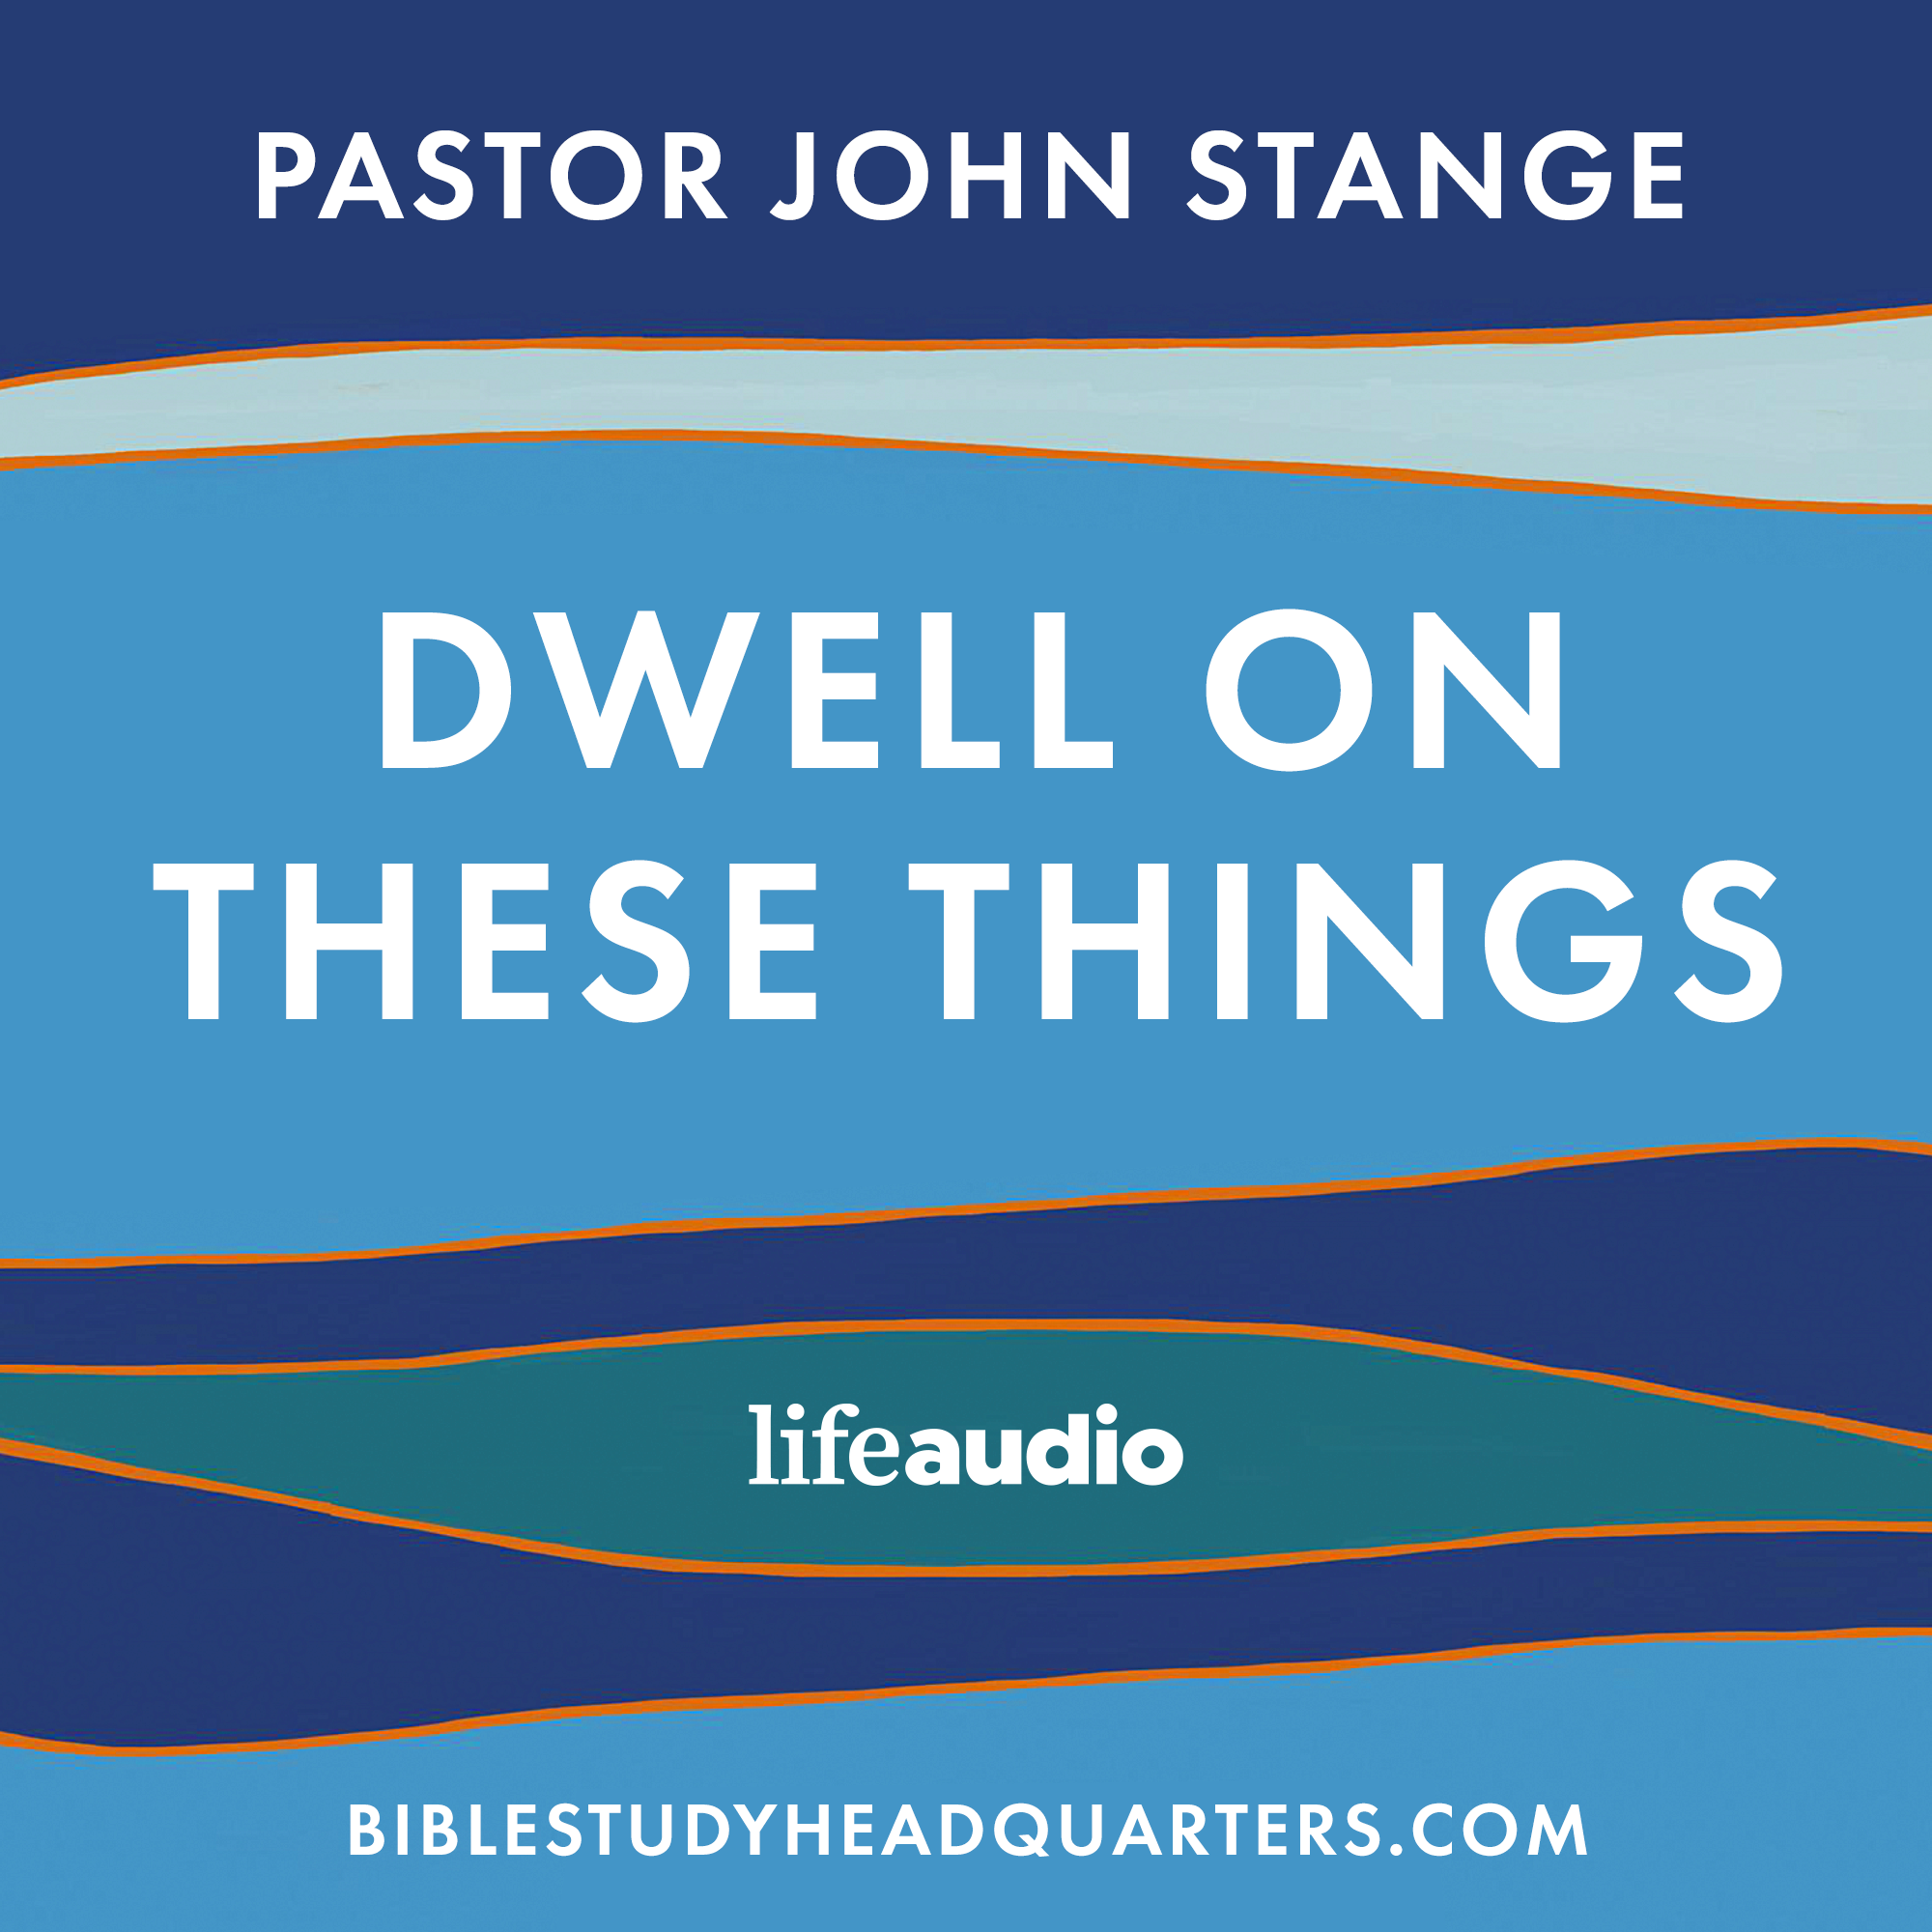 BEST OF EPISODE:  "Finding favor in the Lord's eyes"